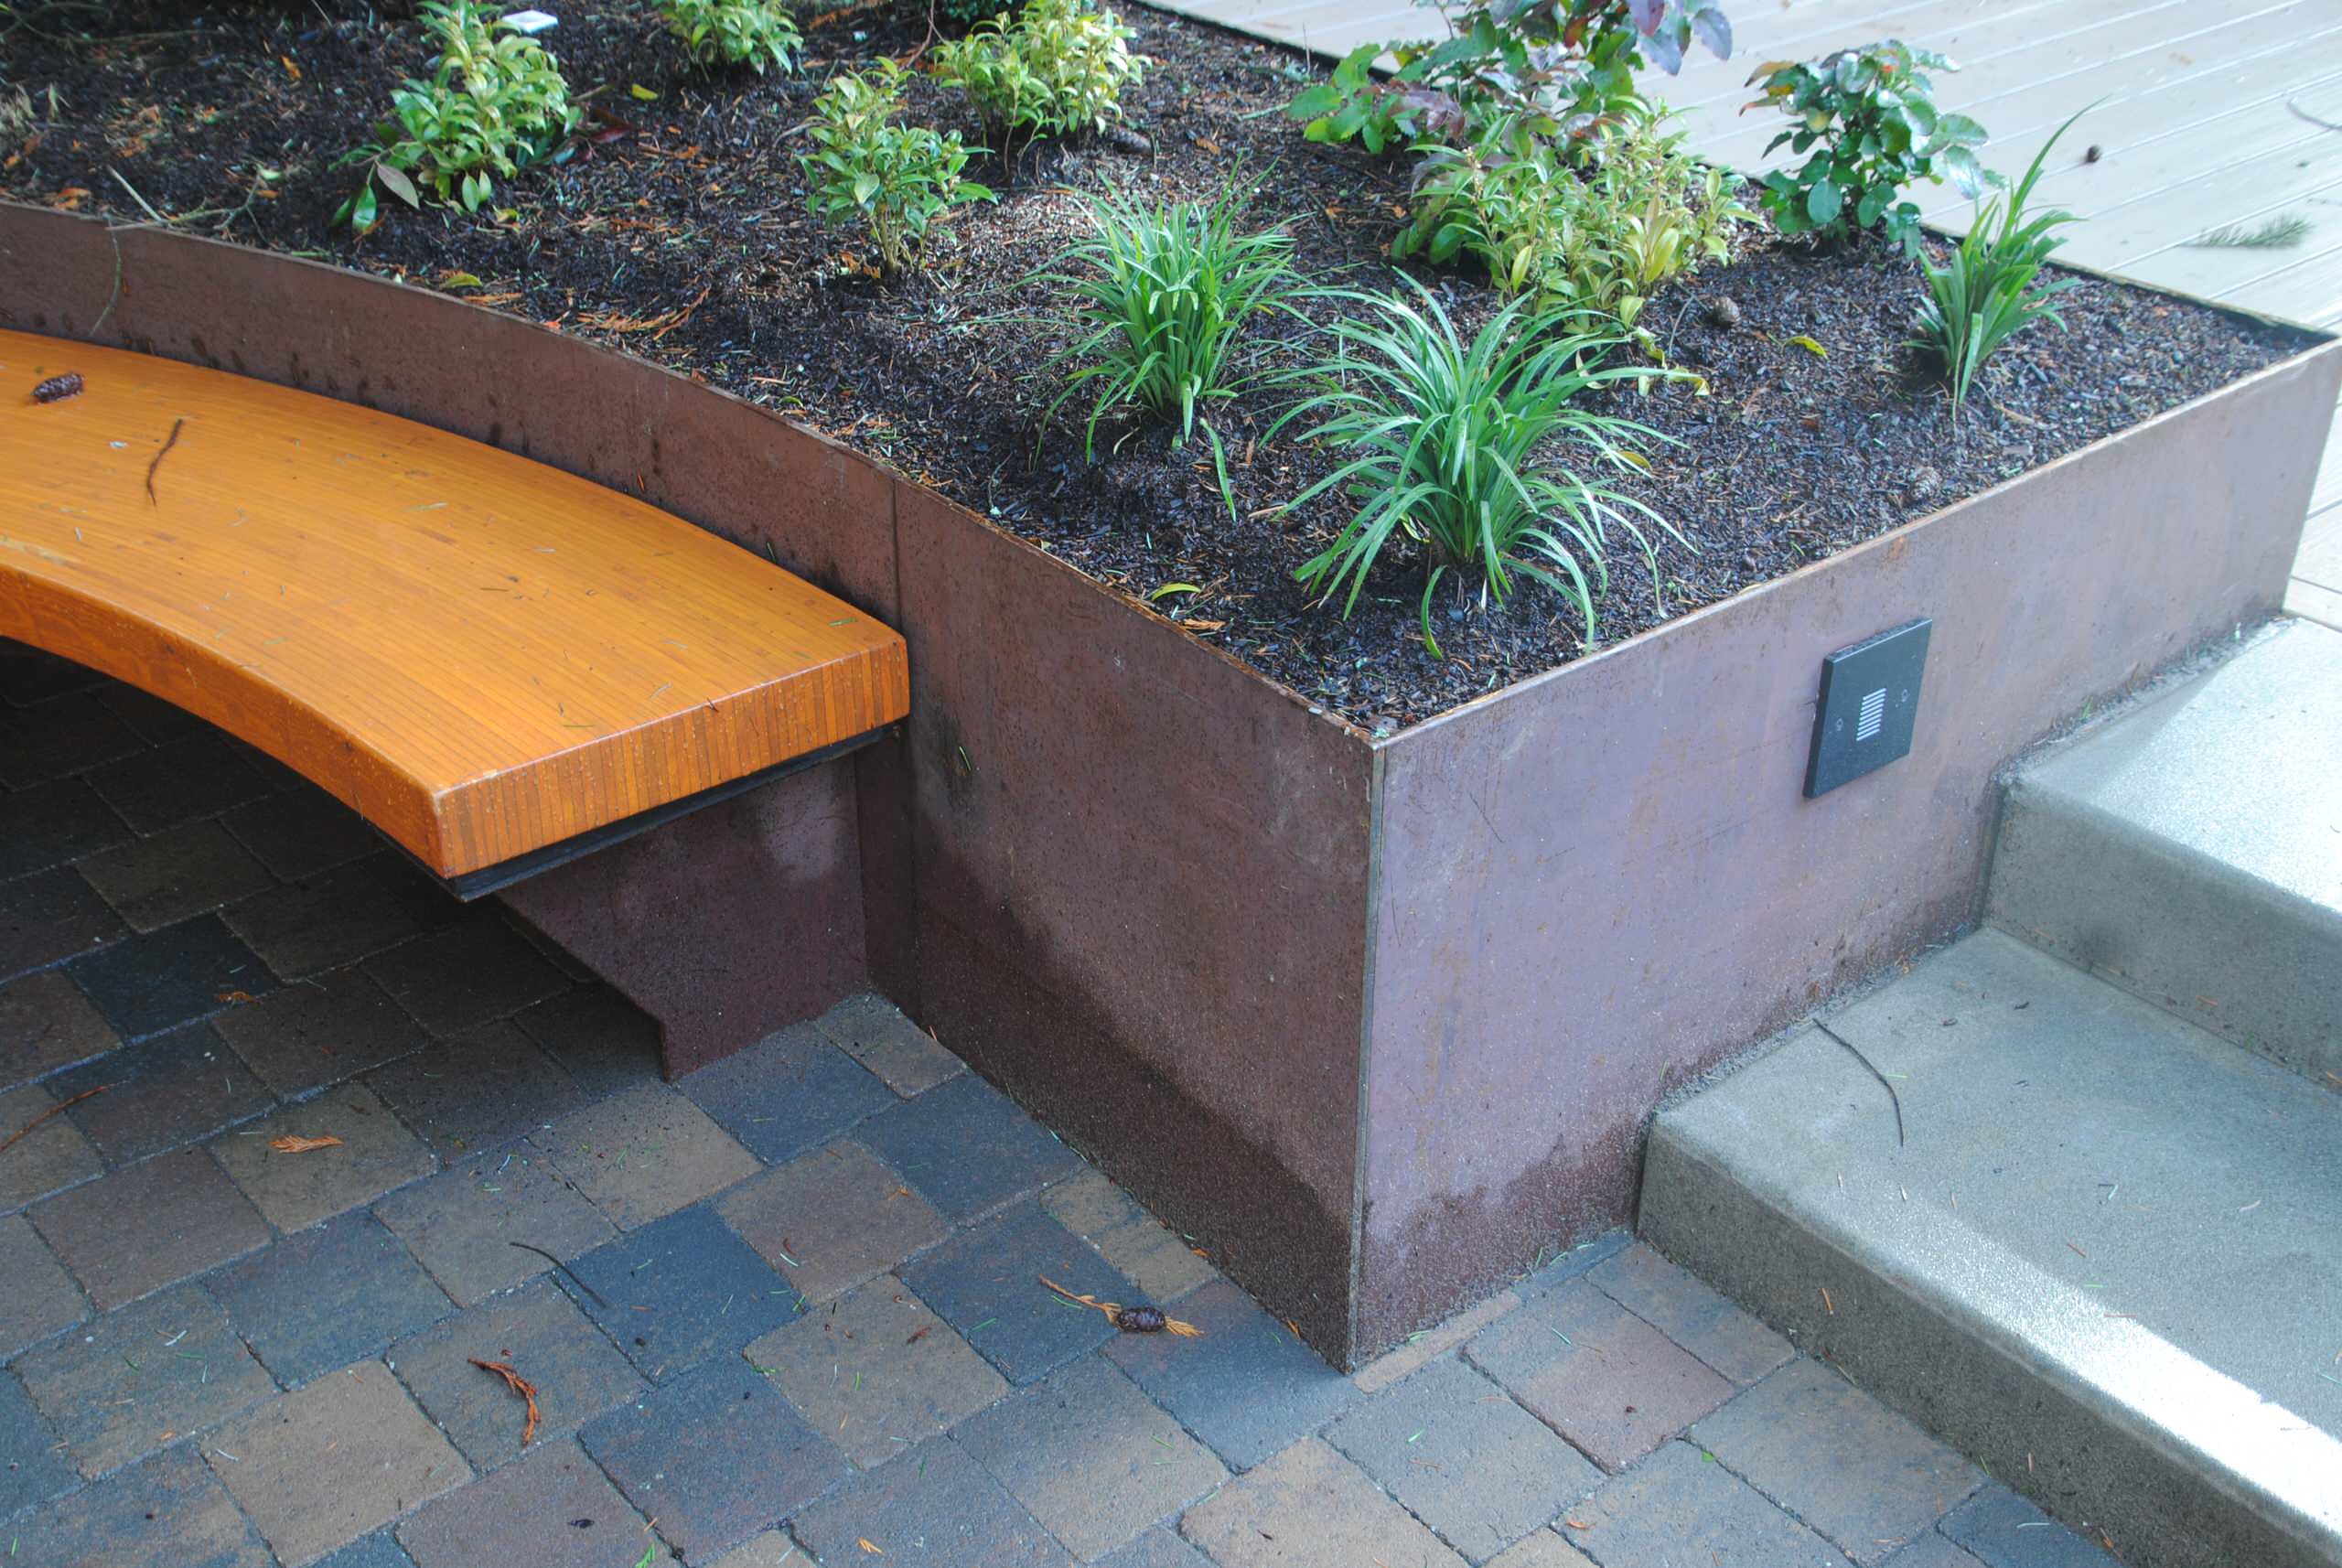 Fire court with steps, planter, bench